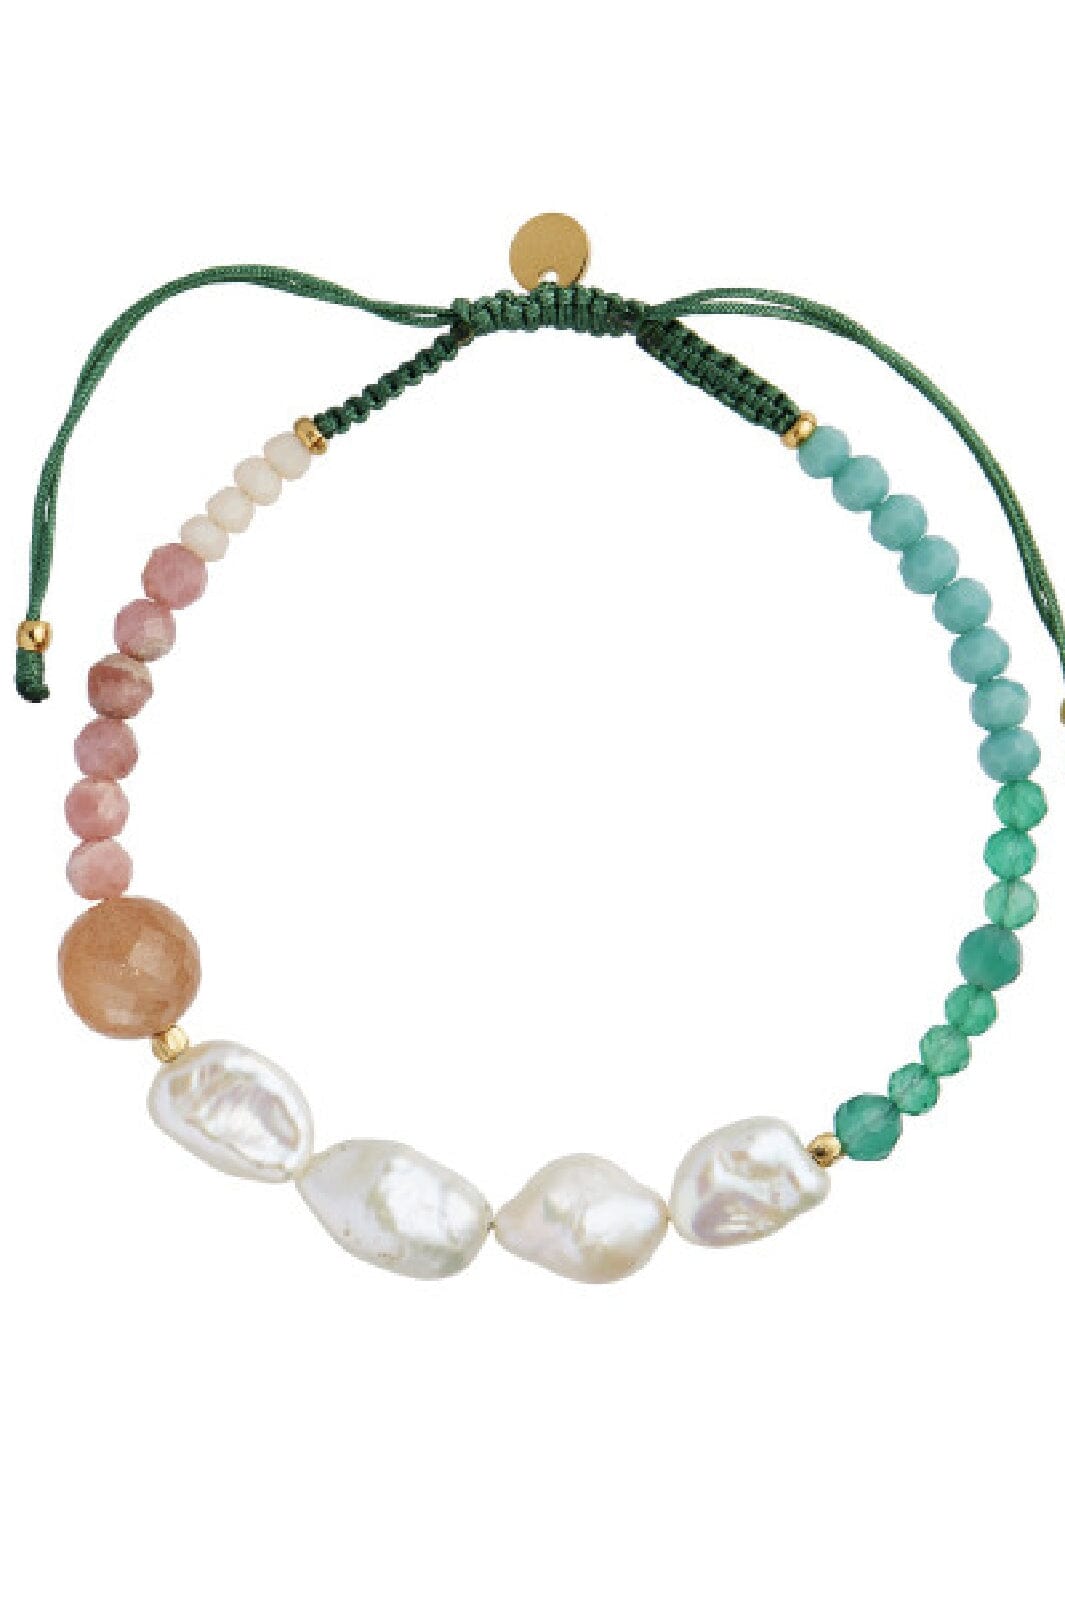 Stine A - Powder Fall Bracelet With Stones And Pearls And Pine Green Ribbon - 3199-02-Os Armbånd 